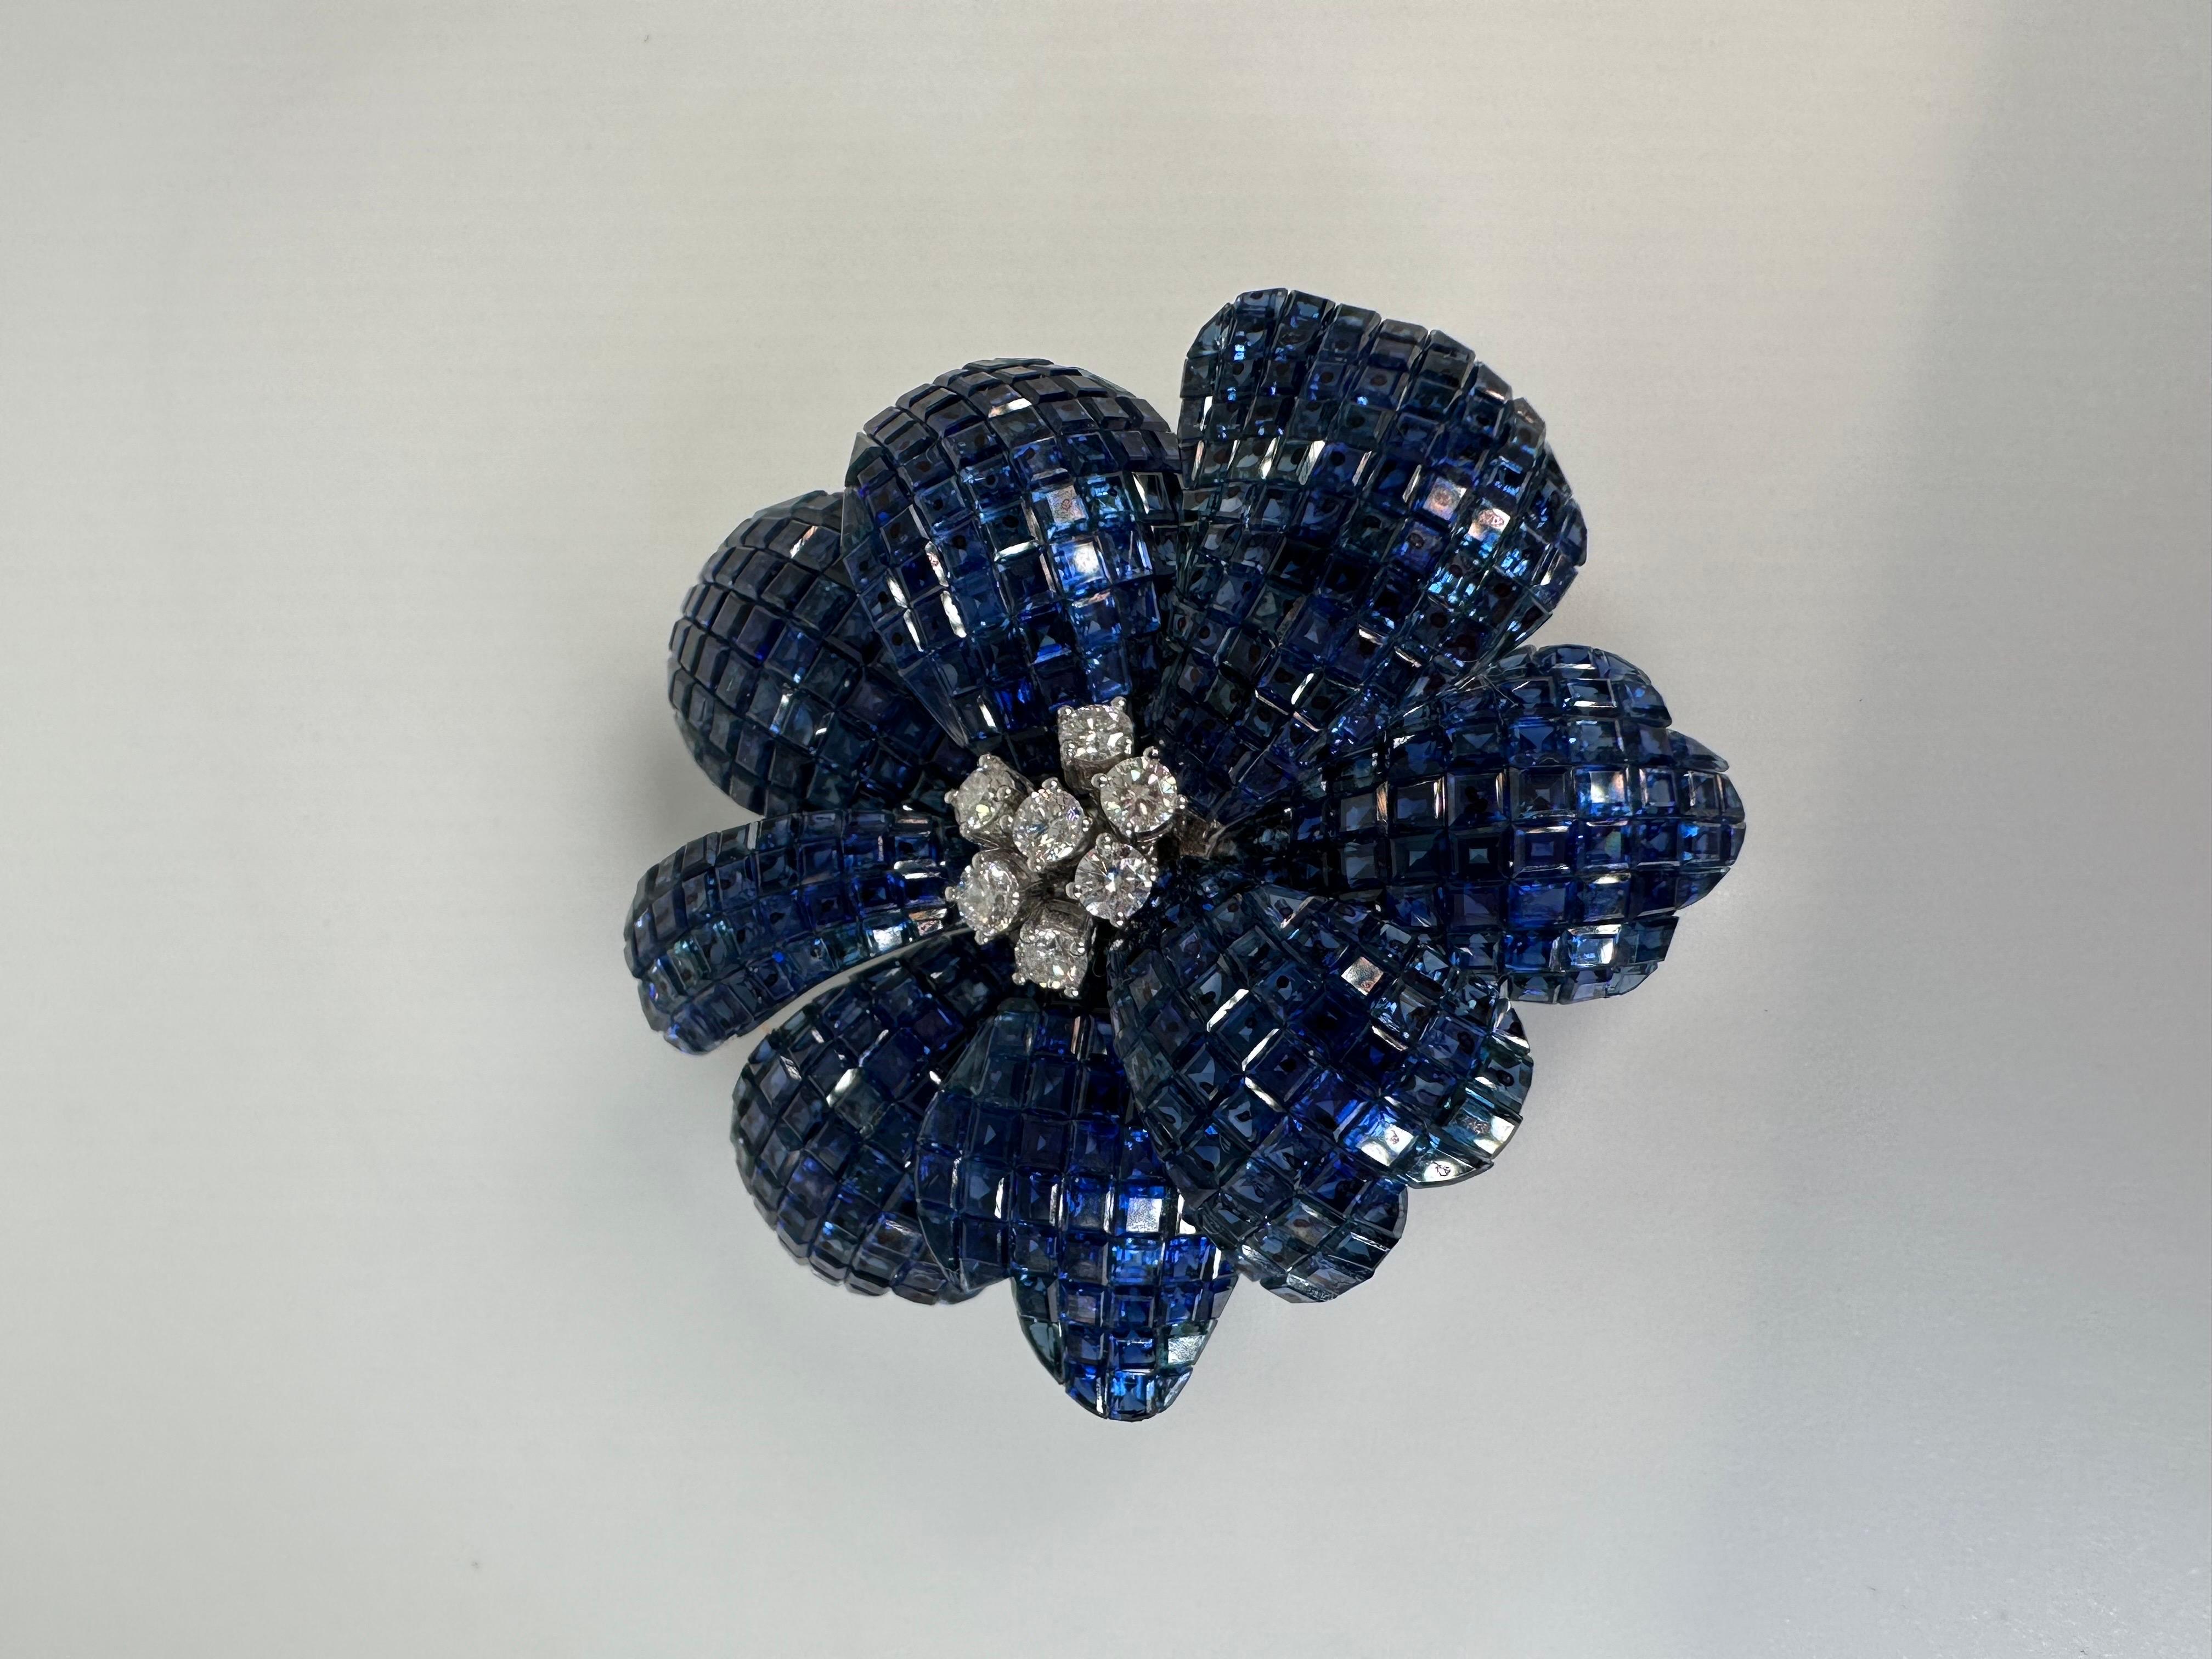 Important and rare invisbly set sapphire and diamond brooch in 18KT white gold.

GOLD: 18KT gold
NATURAL DIAMOND(S)
Clarity/Color: SI/H
Carat:0.63ct
Cut:Round
NATURAL SAPPHIRE(S)
Clarity/Color: Slightly Included/Blue
Count: 503